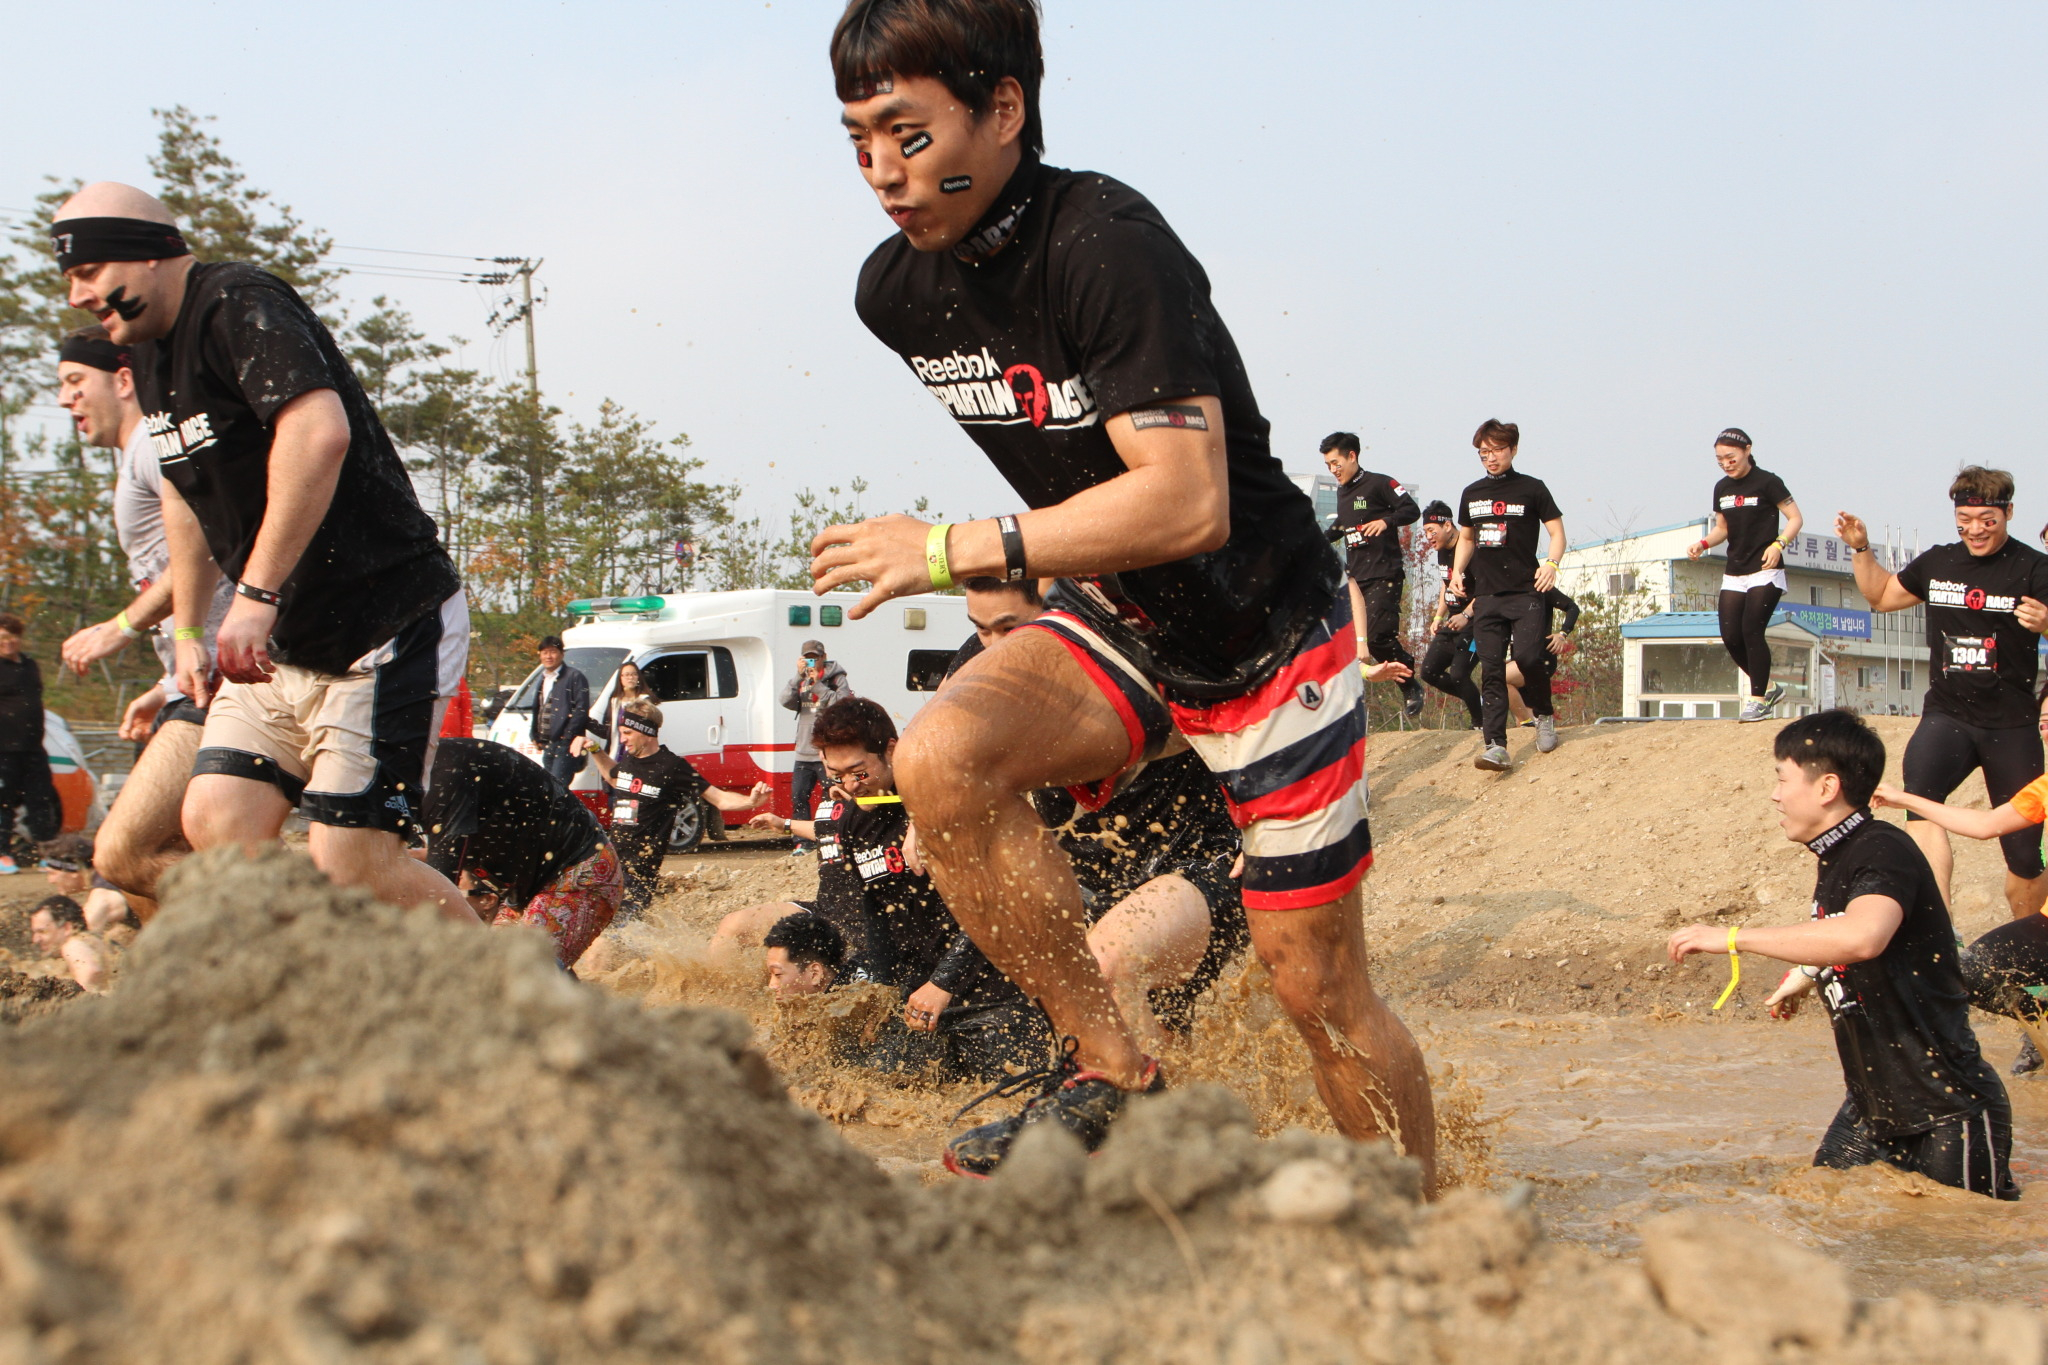 2048x1365 Win FREE Entry into the 2015 Singapore Spartan Race